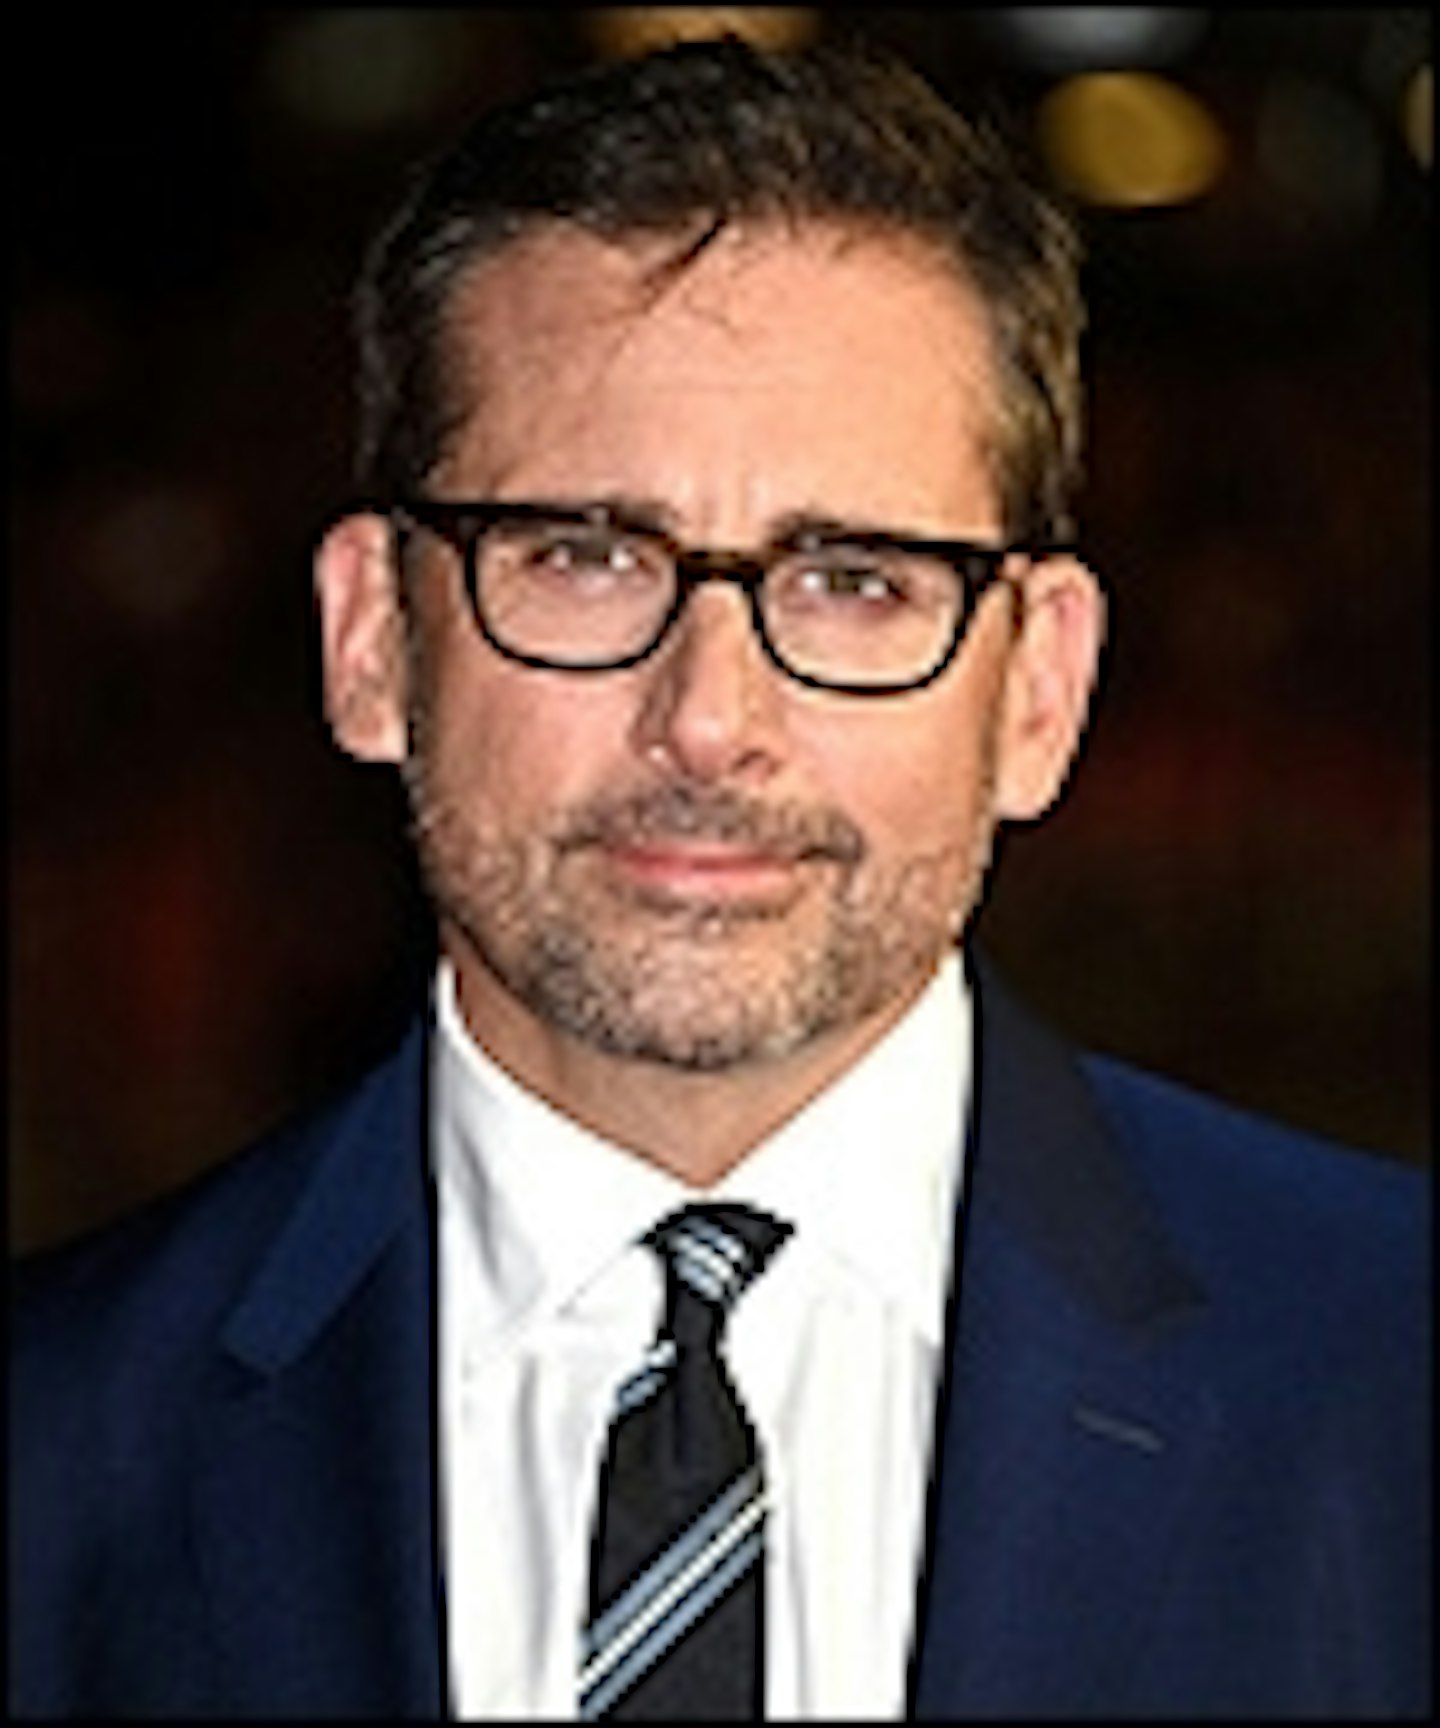 Steve Carell Replacing Bruce Willis In Woody Allen's Latest